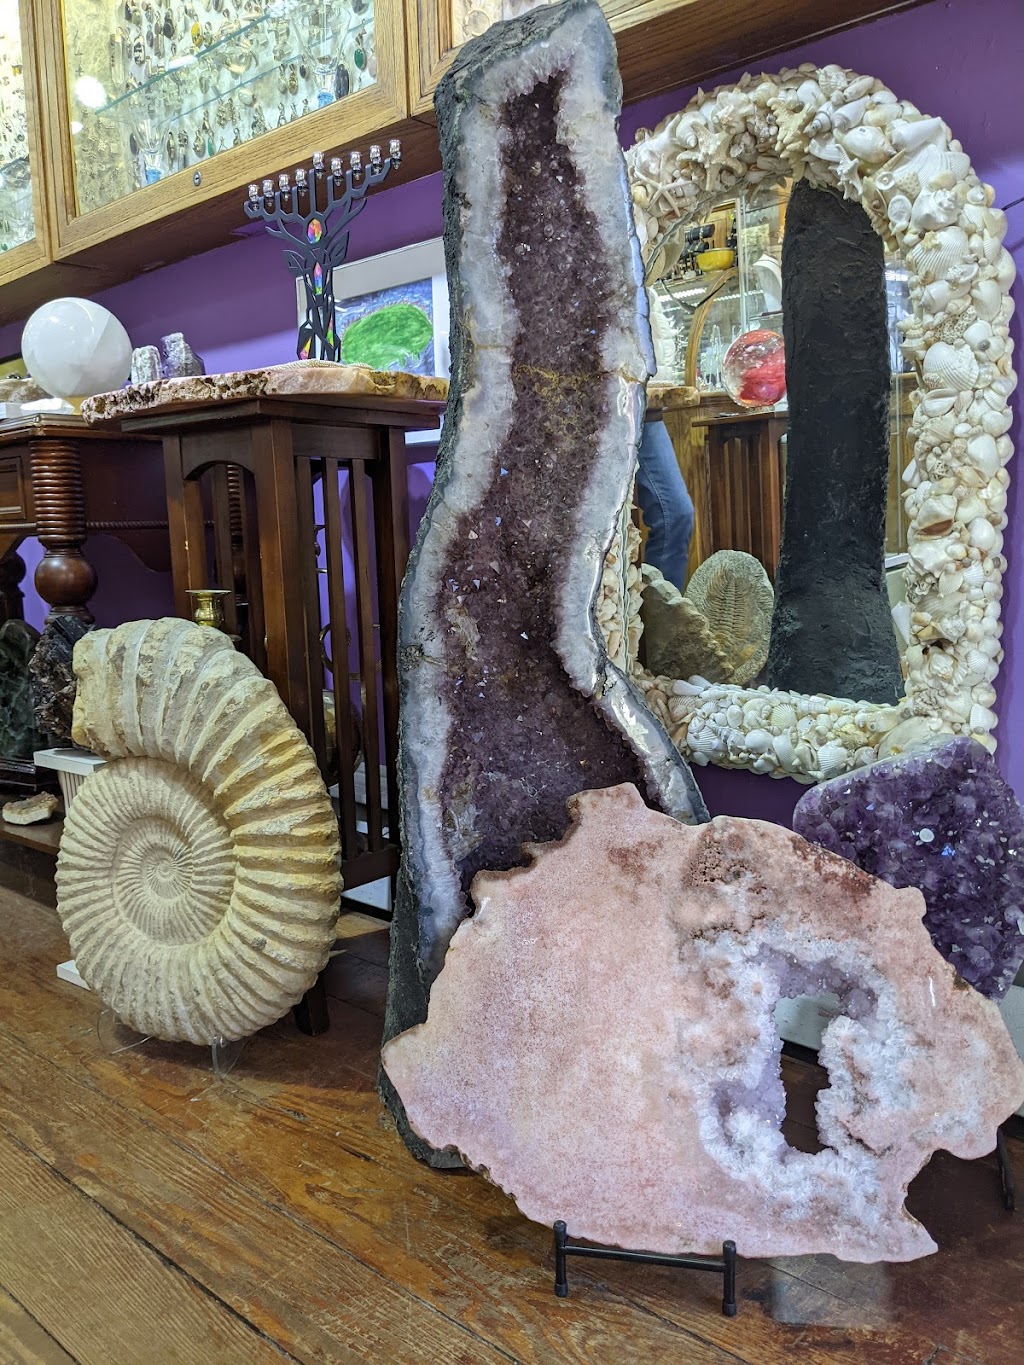 Exquisite Earth | 126 S Main St, New Hope, PA 18938 | Phone: (215) 862-2130